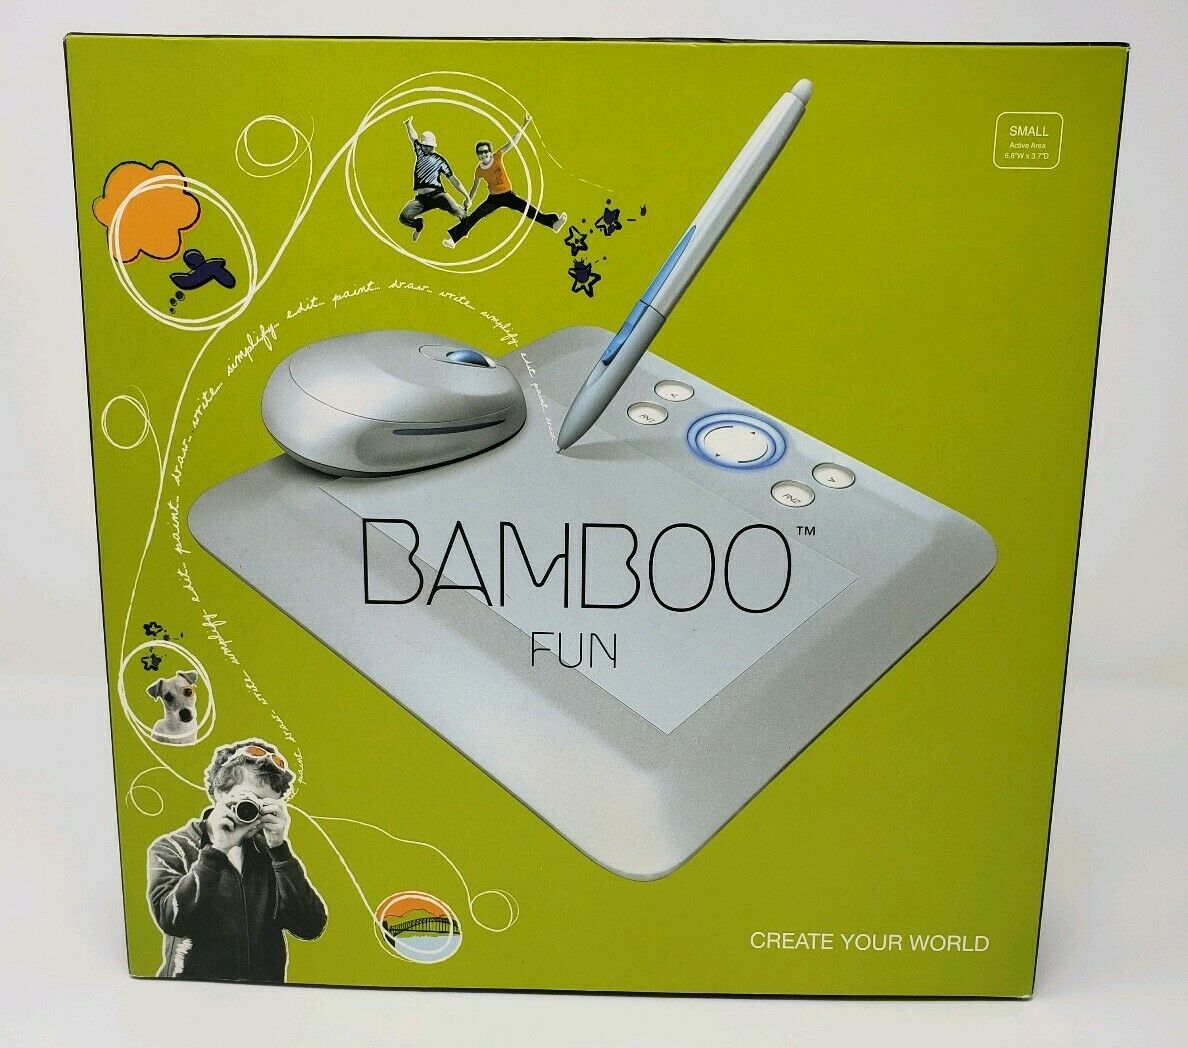 Wacom Bamboo Fun CTE450S USB Drawing Tablet with Pen and Mouse - New